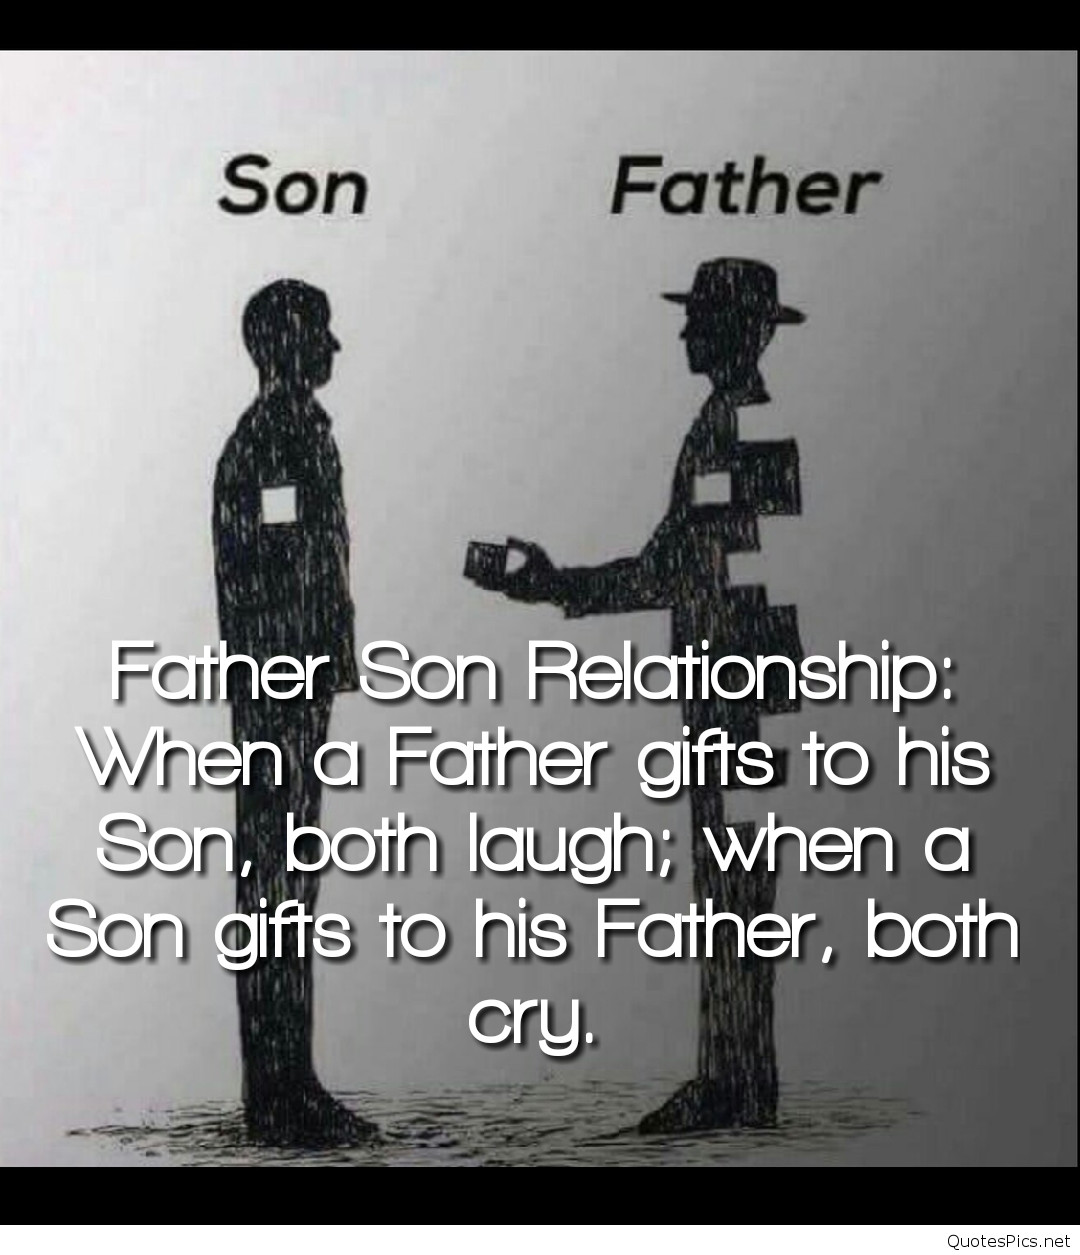 Father Son Relationship Quotes
 52 Relationship Quotes Boyfriend Brother Sister